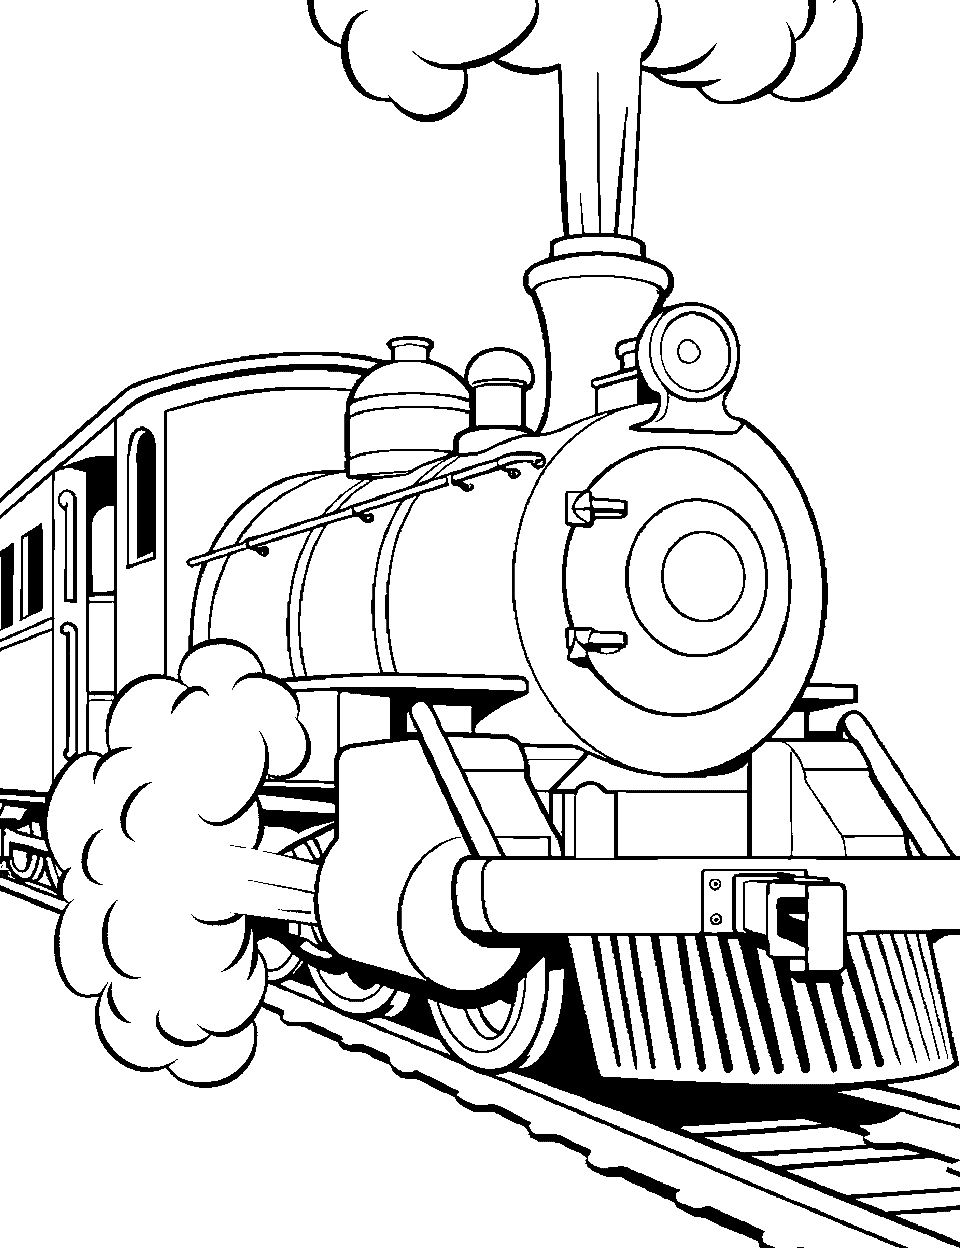 Vintage Steam Locomotive Train Coloring Page - An old-fashioned steam locomotive chugging smoke.